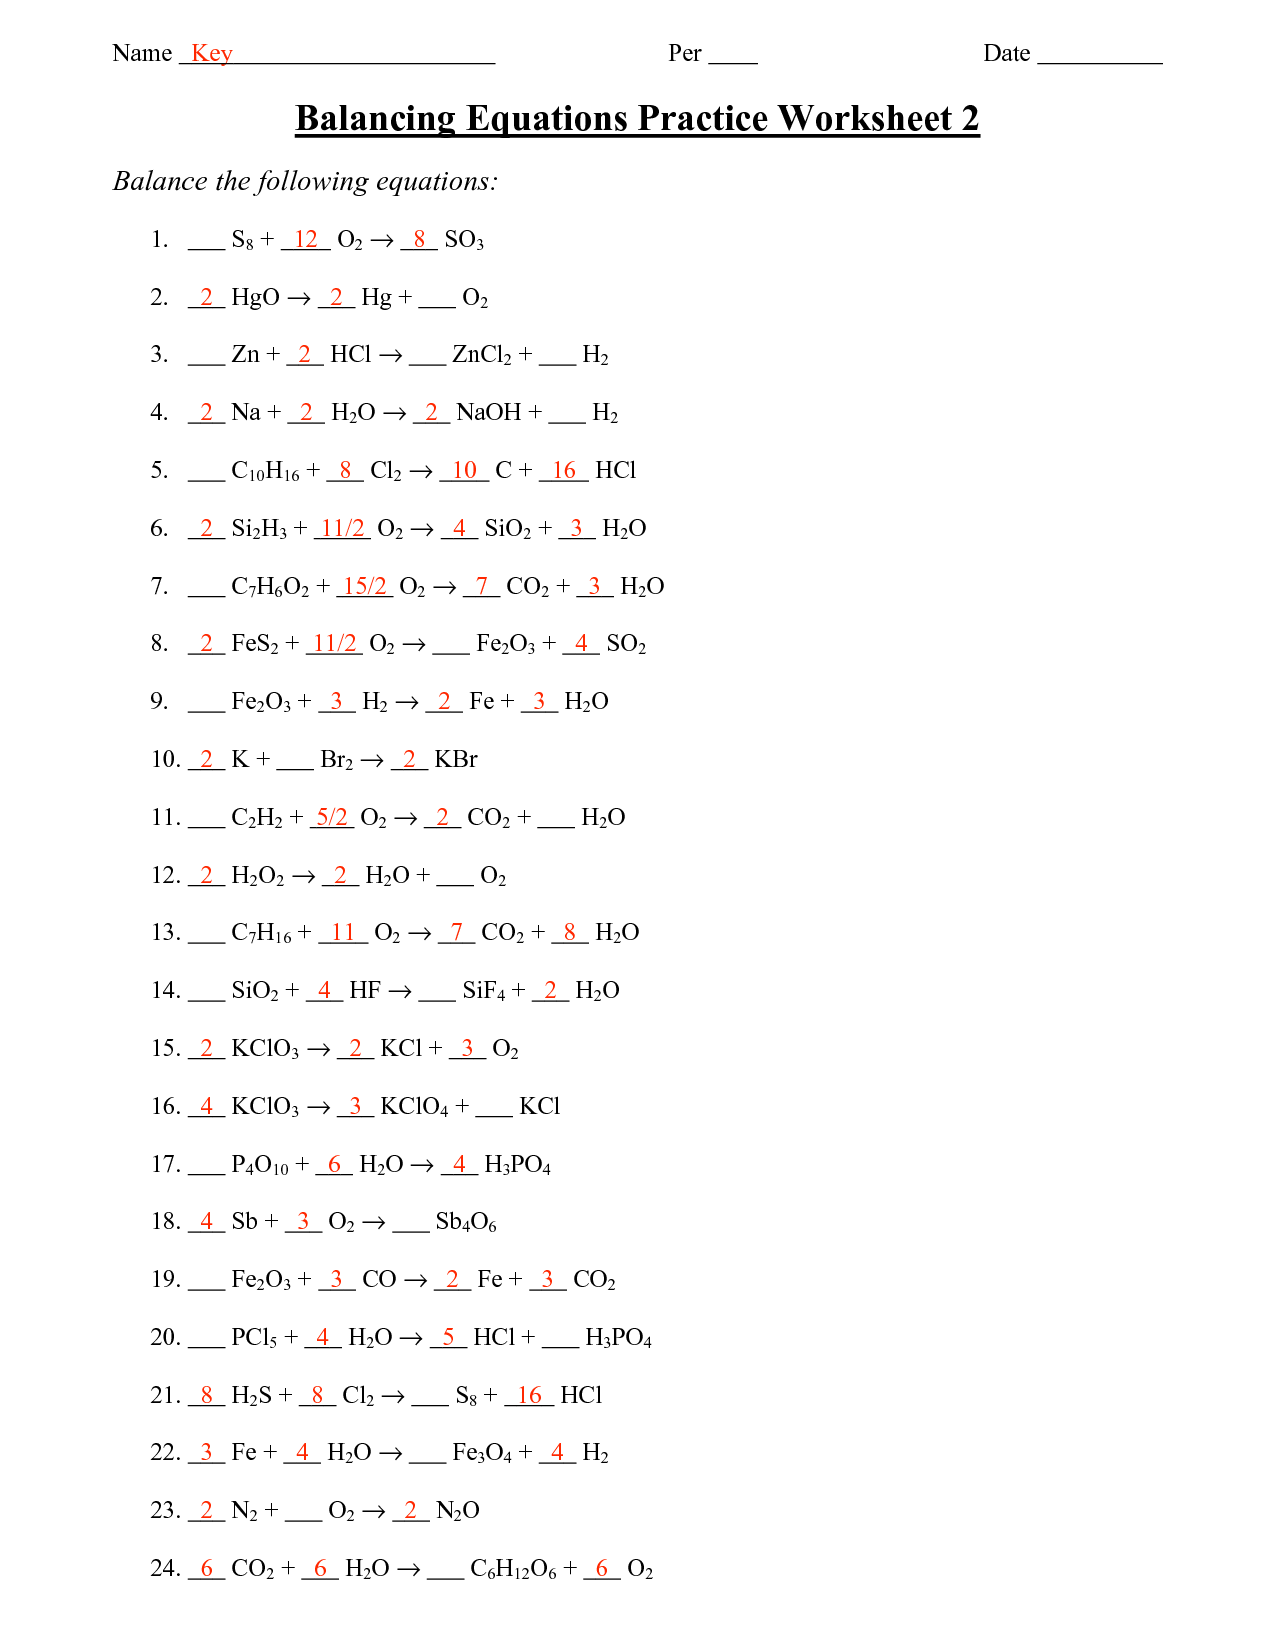 15 Best Images of Chemical Reactions Worksheet With Answers - Types